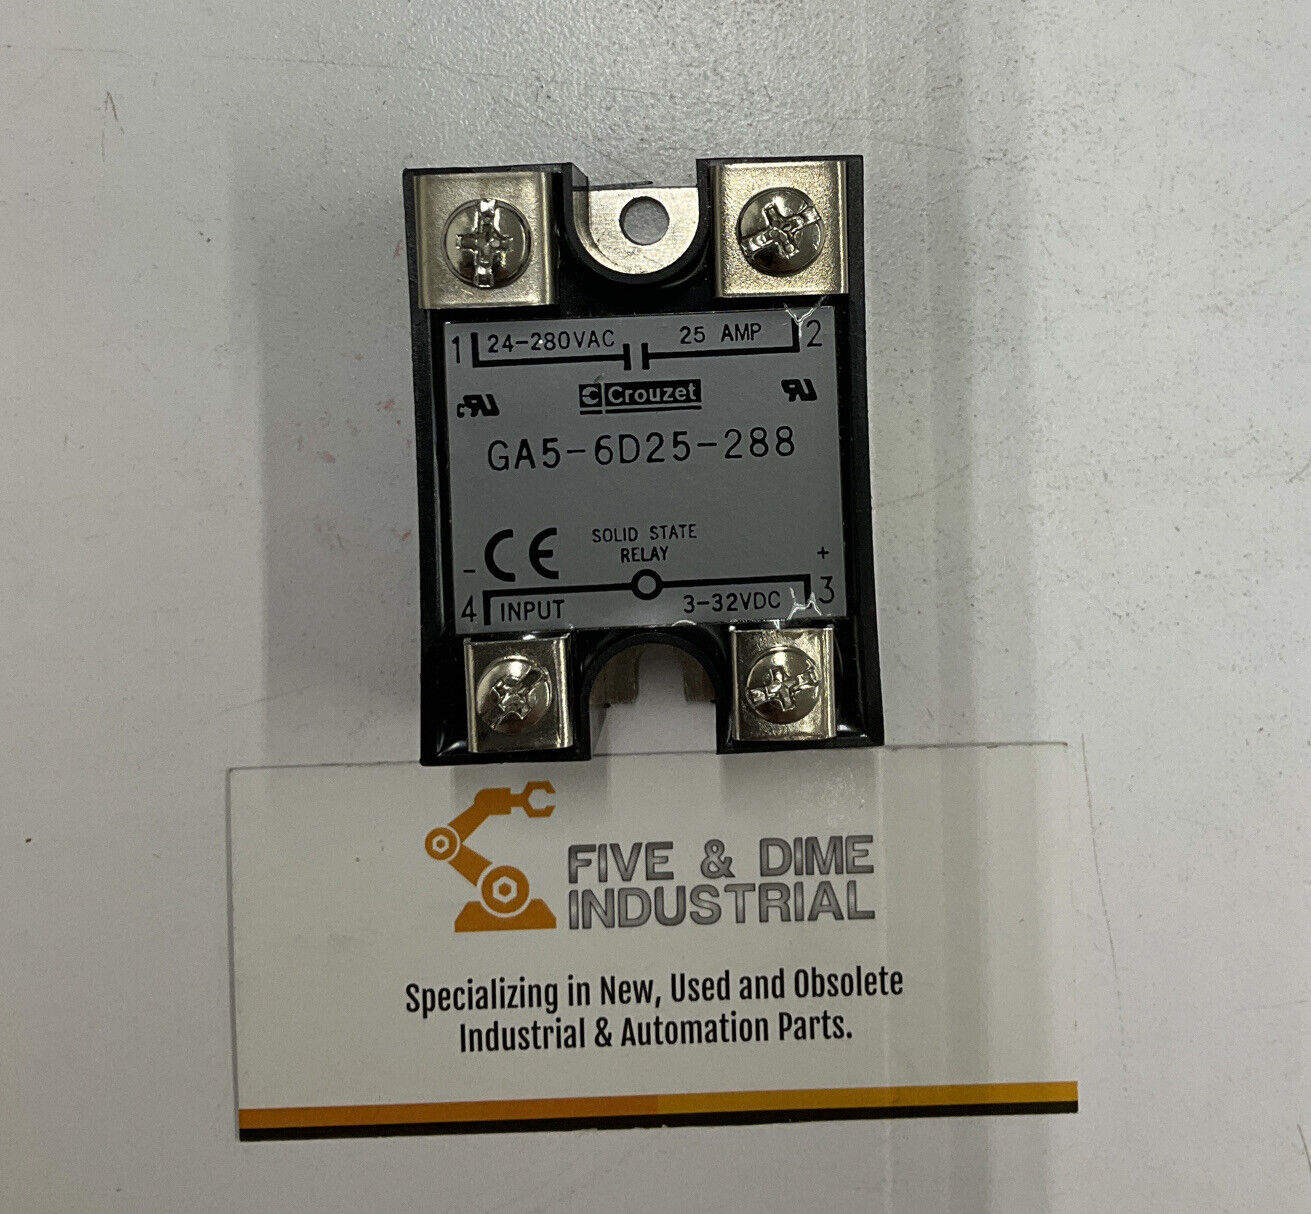 Crouzet GA5-6D25-288 New Solid State Relay 25A 24-280 VAC (CL176)